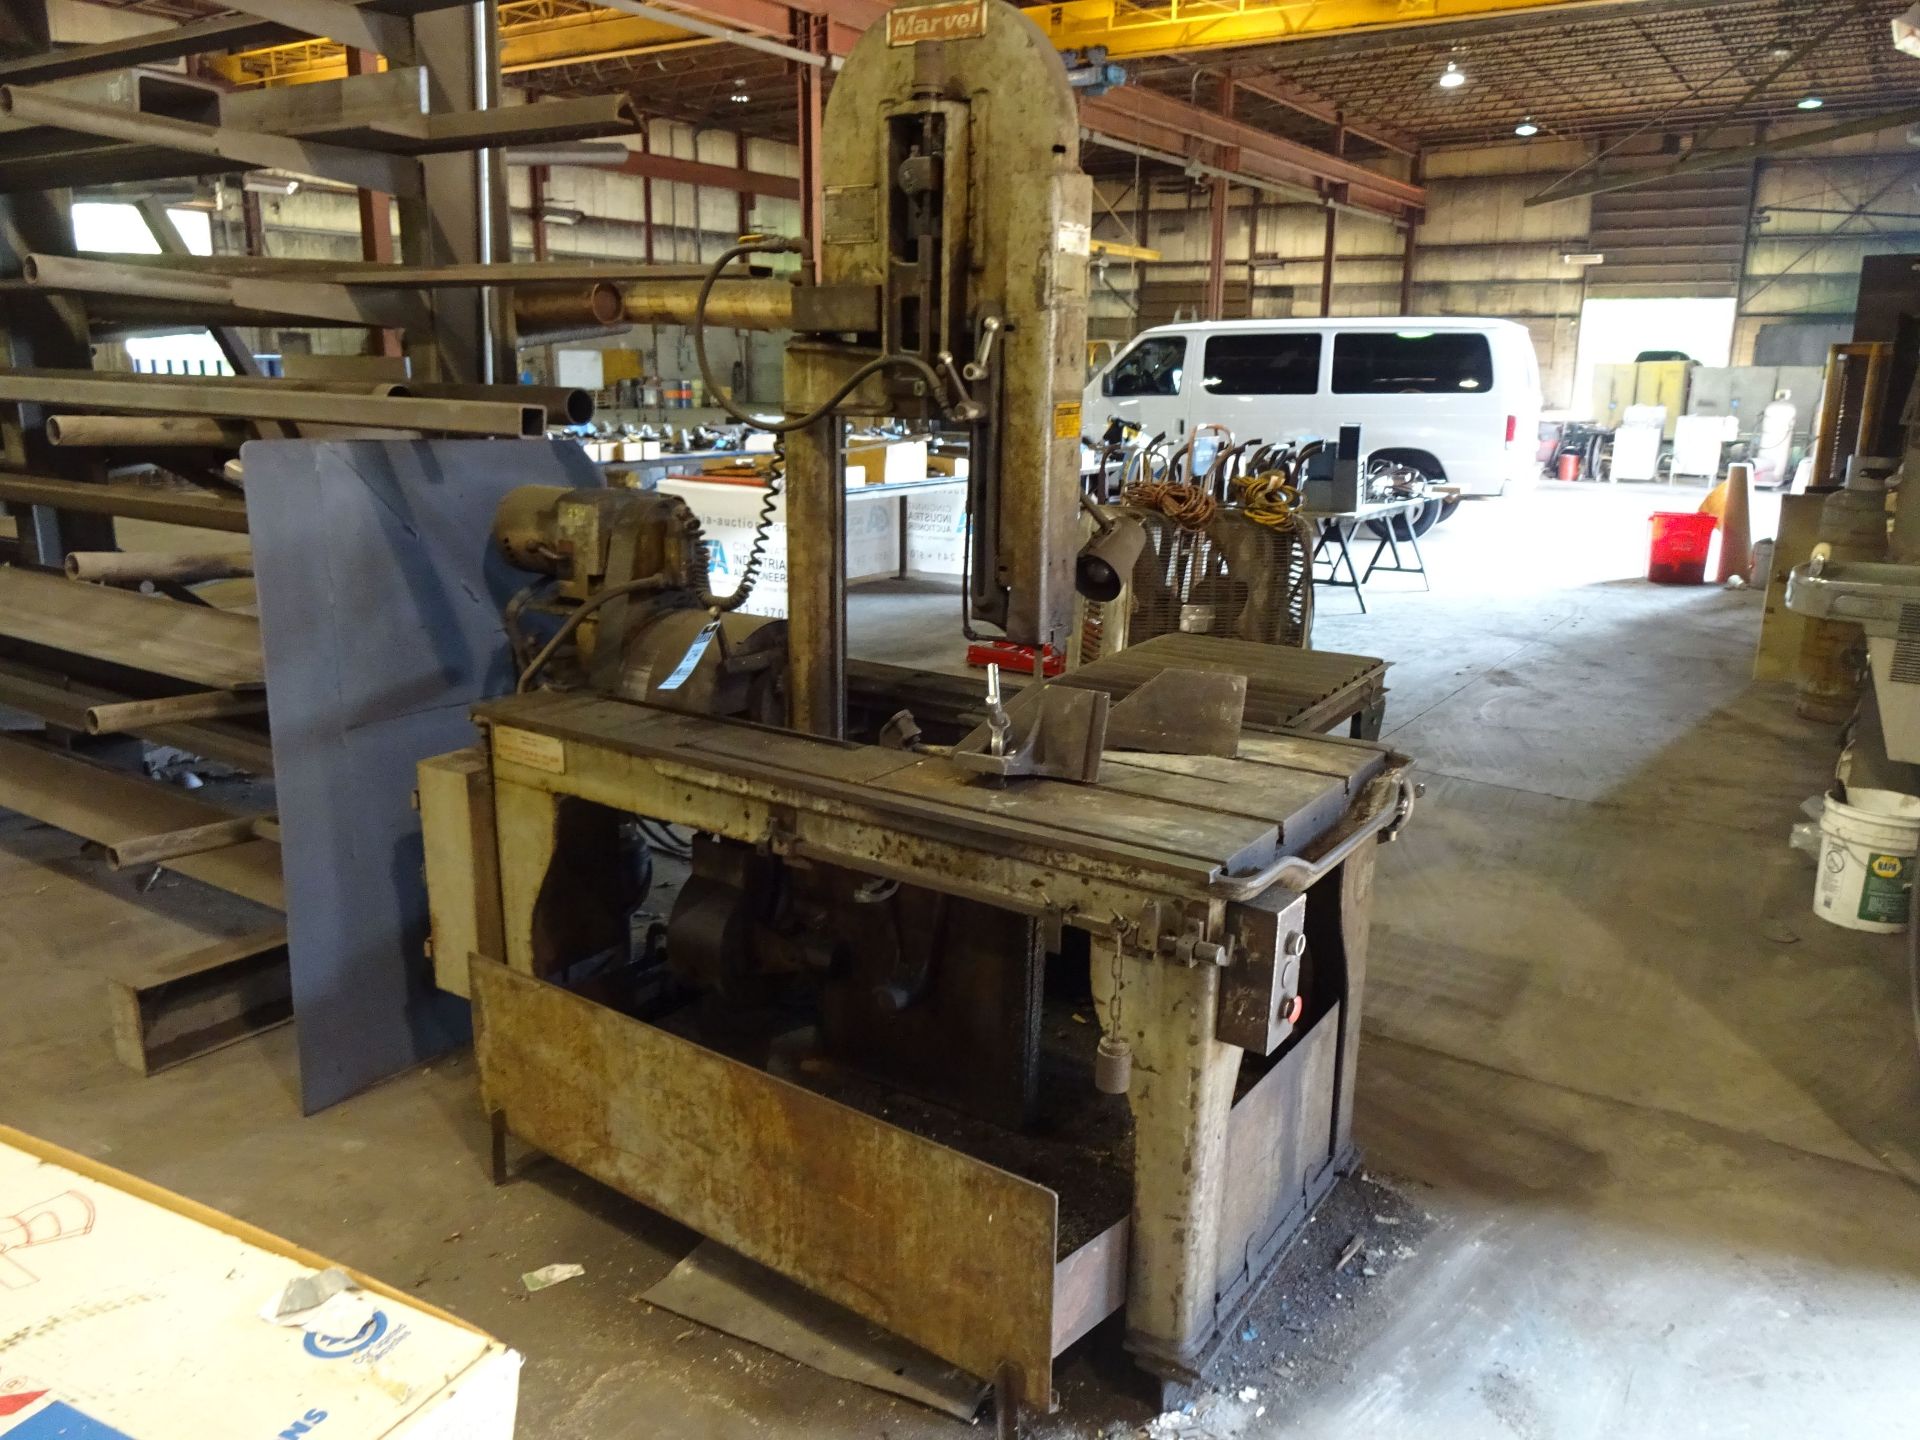 18" X 20" MARVEL SERIES 8/M8/81 VERTICAL BAND SAW; S/N 811948, WITH FEED AND OUT TAKE ROLLER